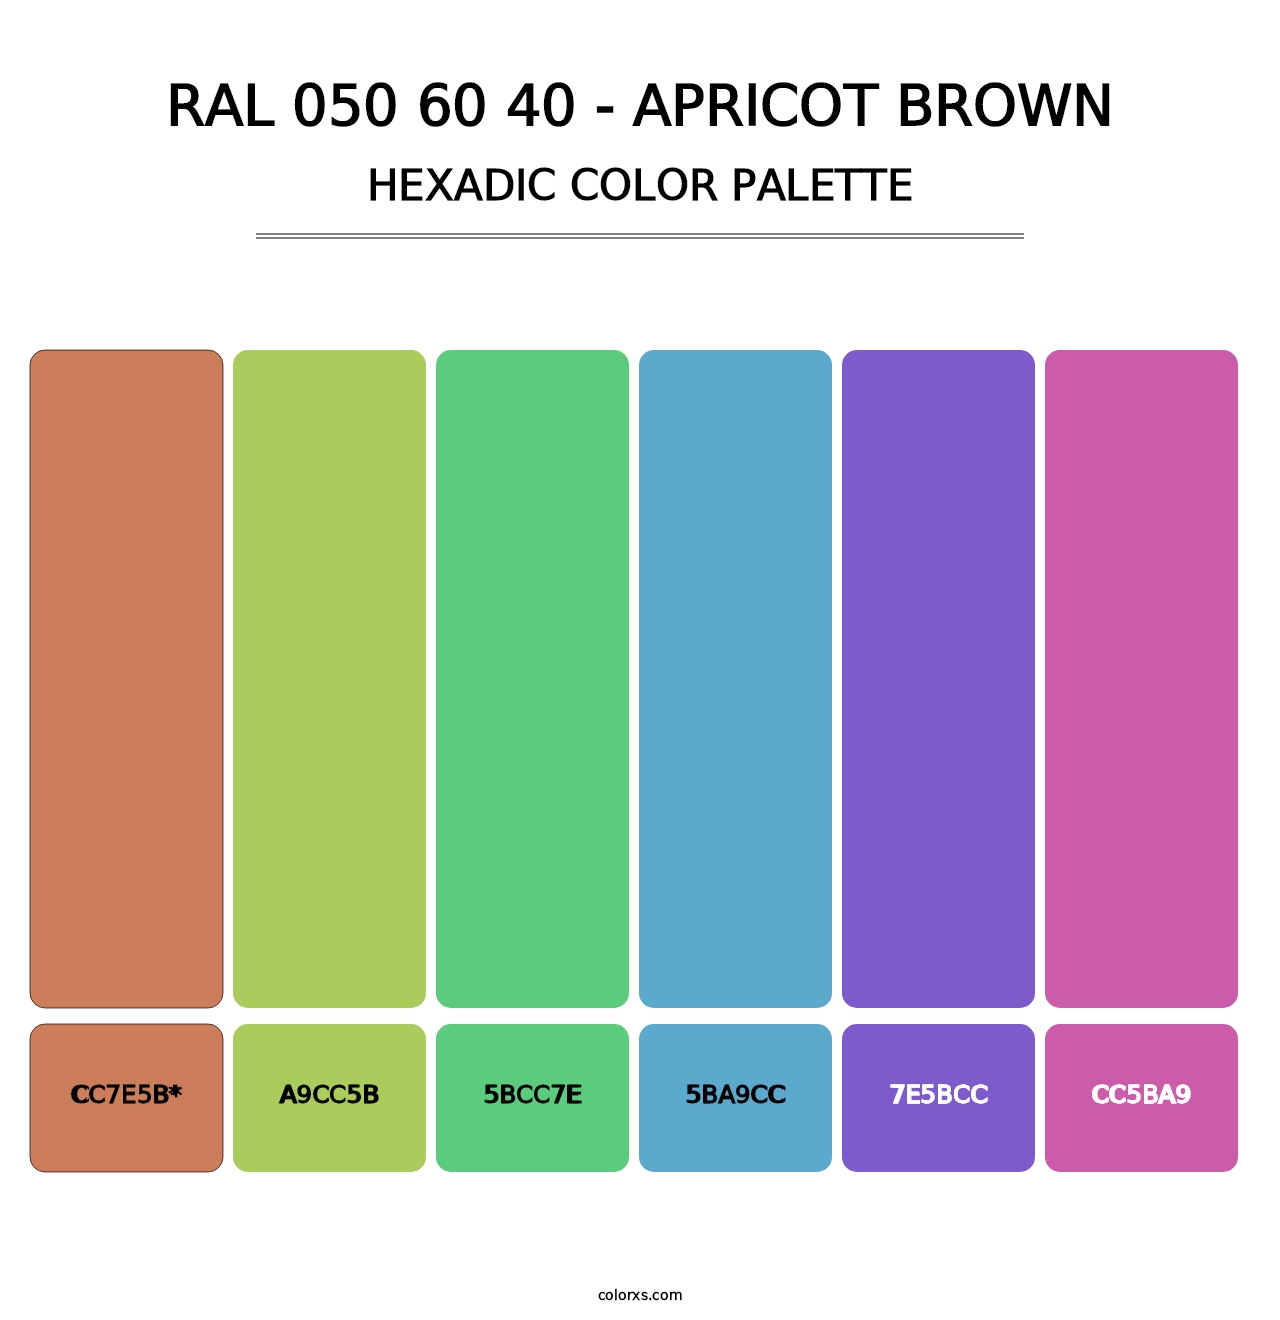 RAL 050 60 40 - Apricot Brown - Hexadic Color Palette